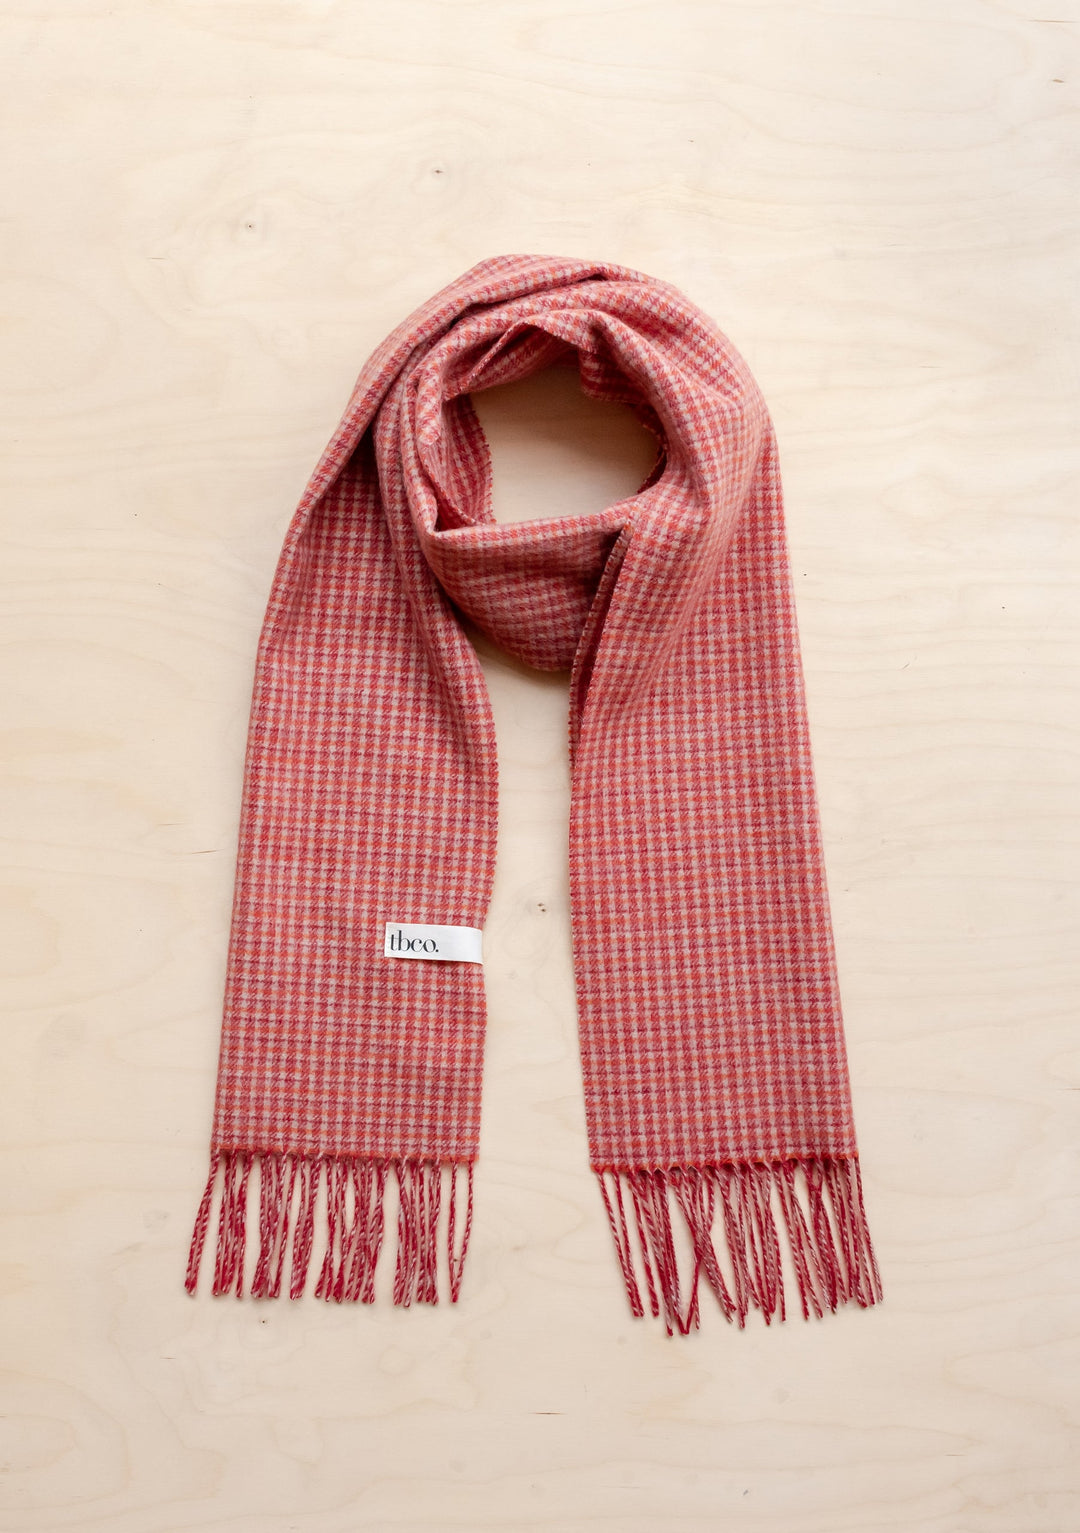 Men's Lambswool Scarf in Berry Textured Check